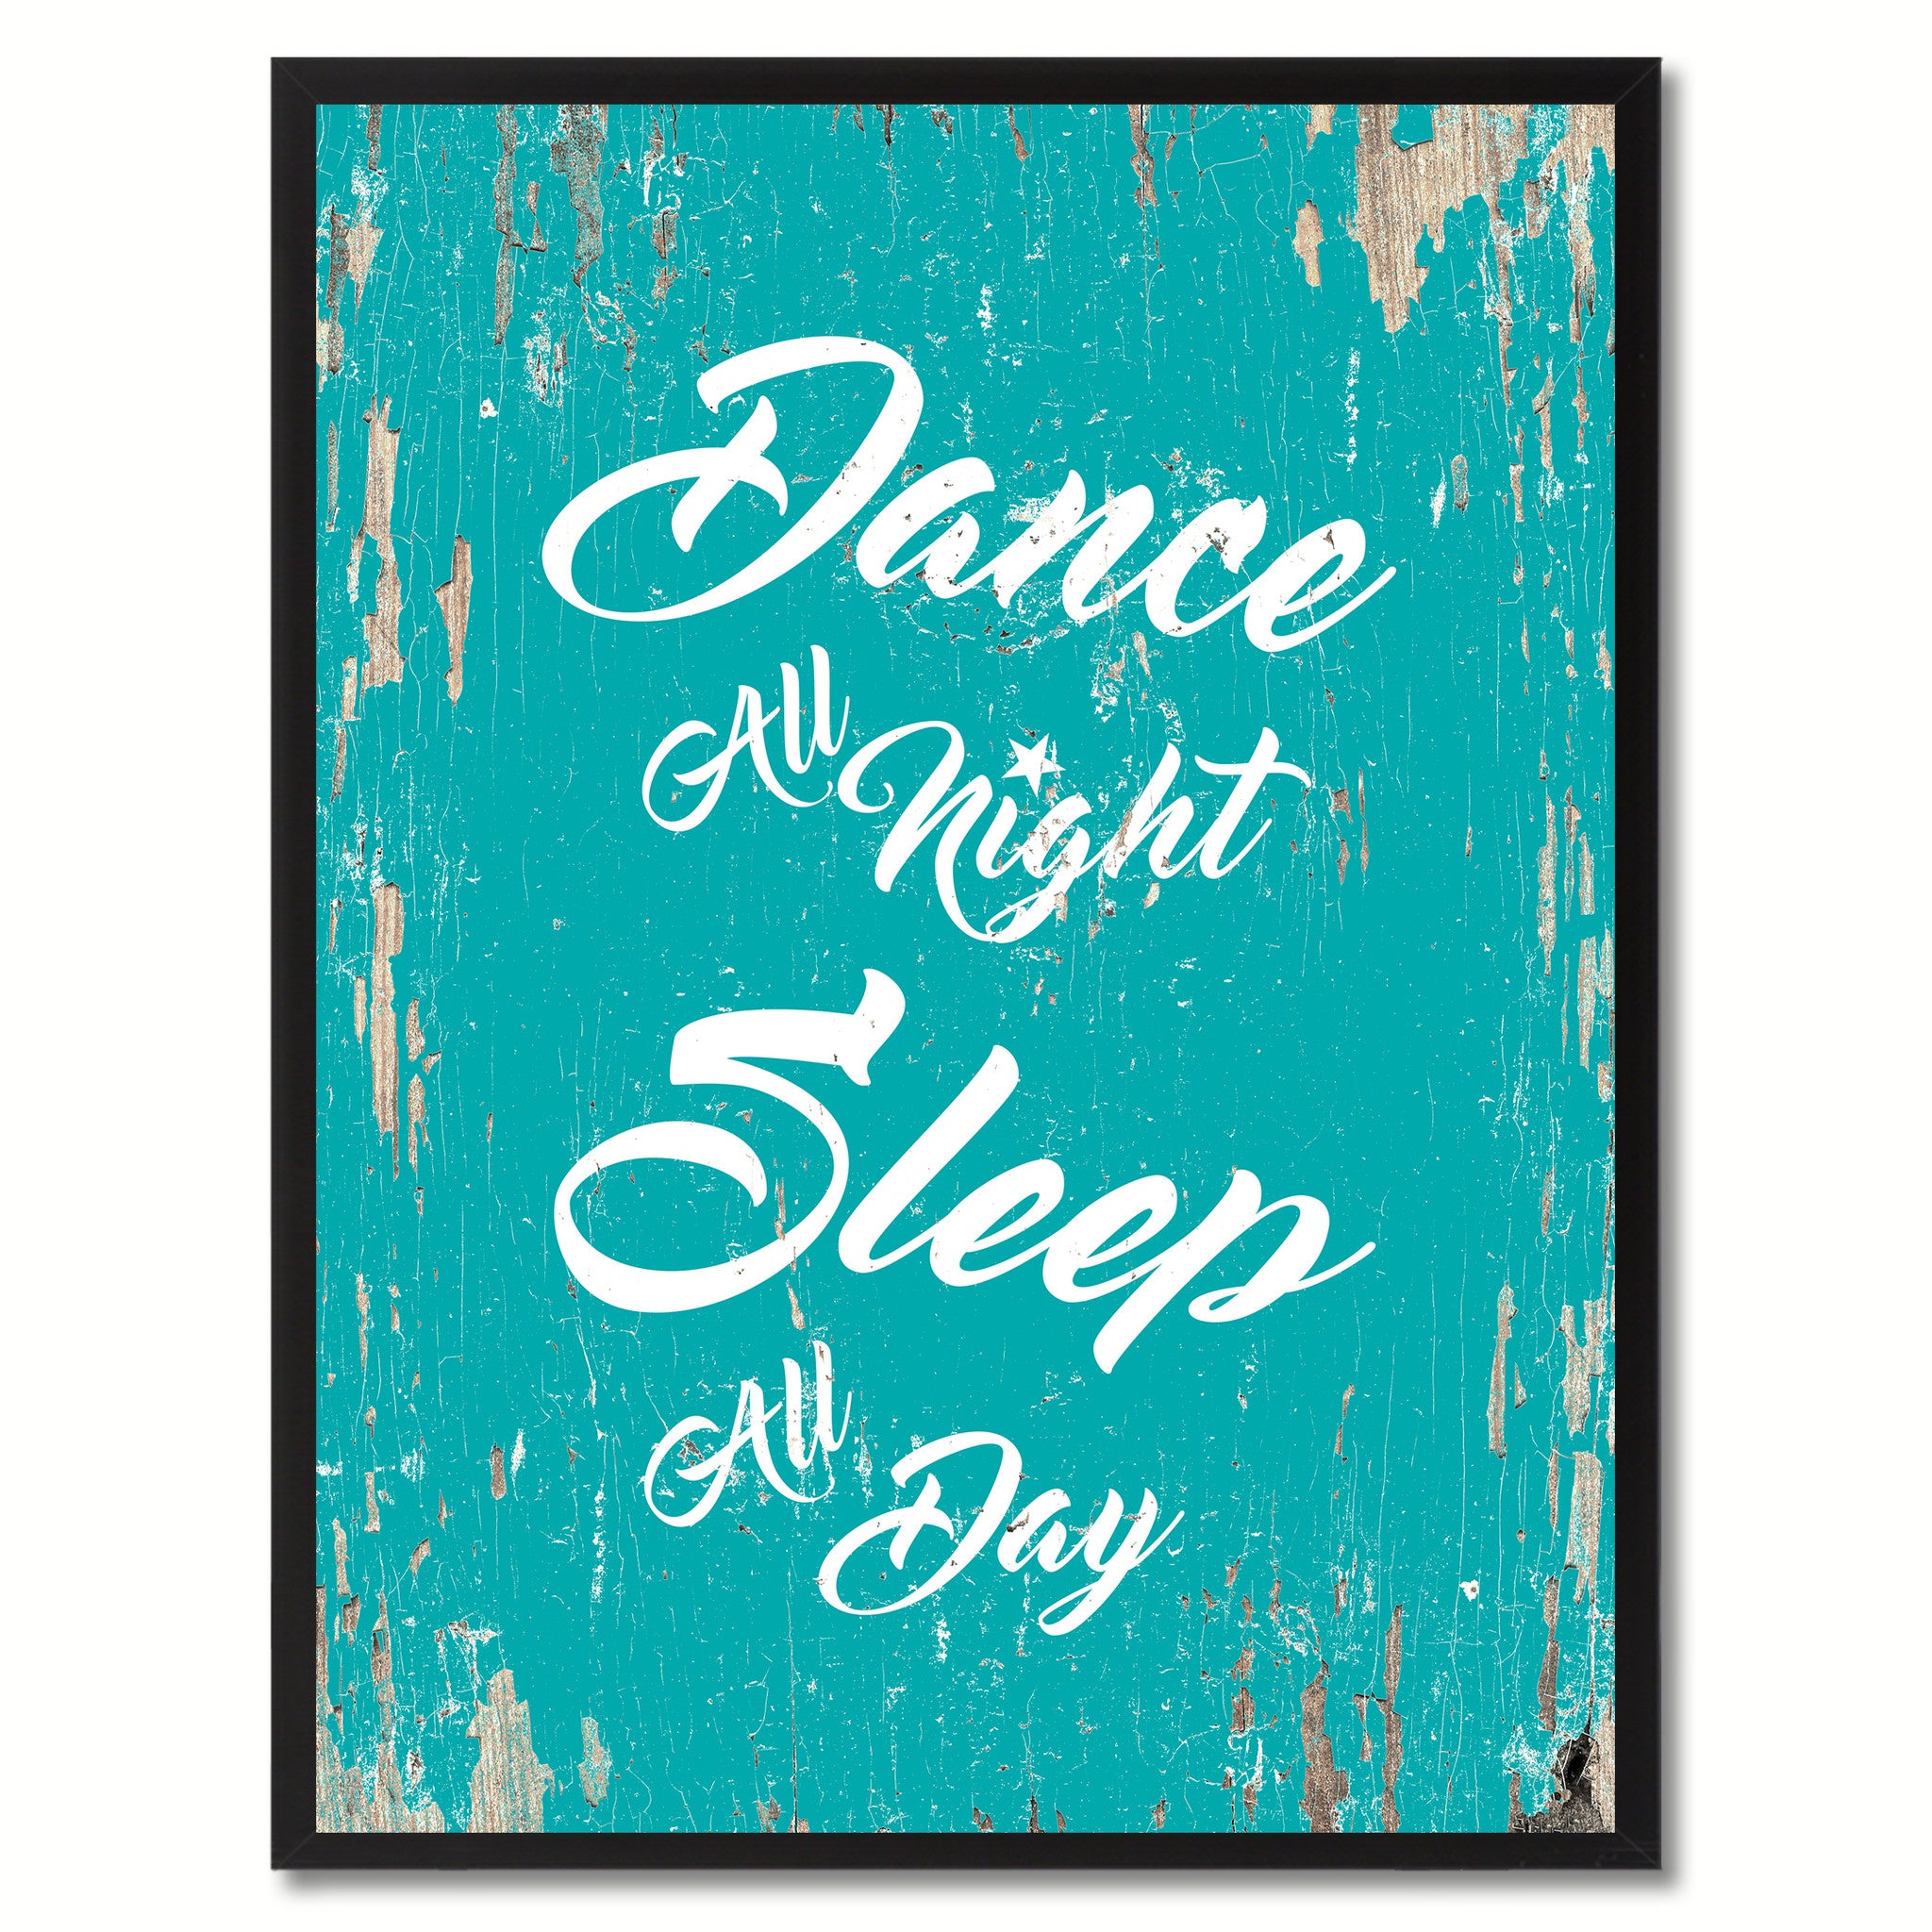 Dance all night sleep all day Happy Quote Saying Gift Ideas Home Decor Wall Art